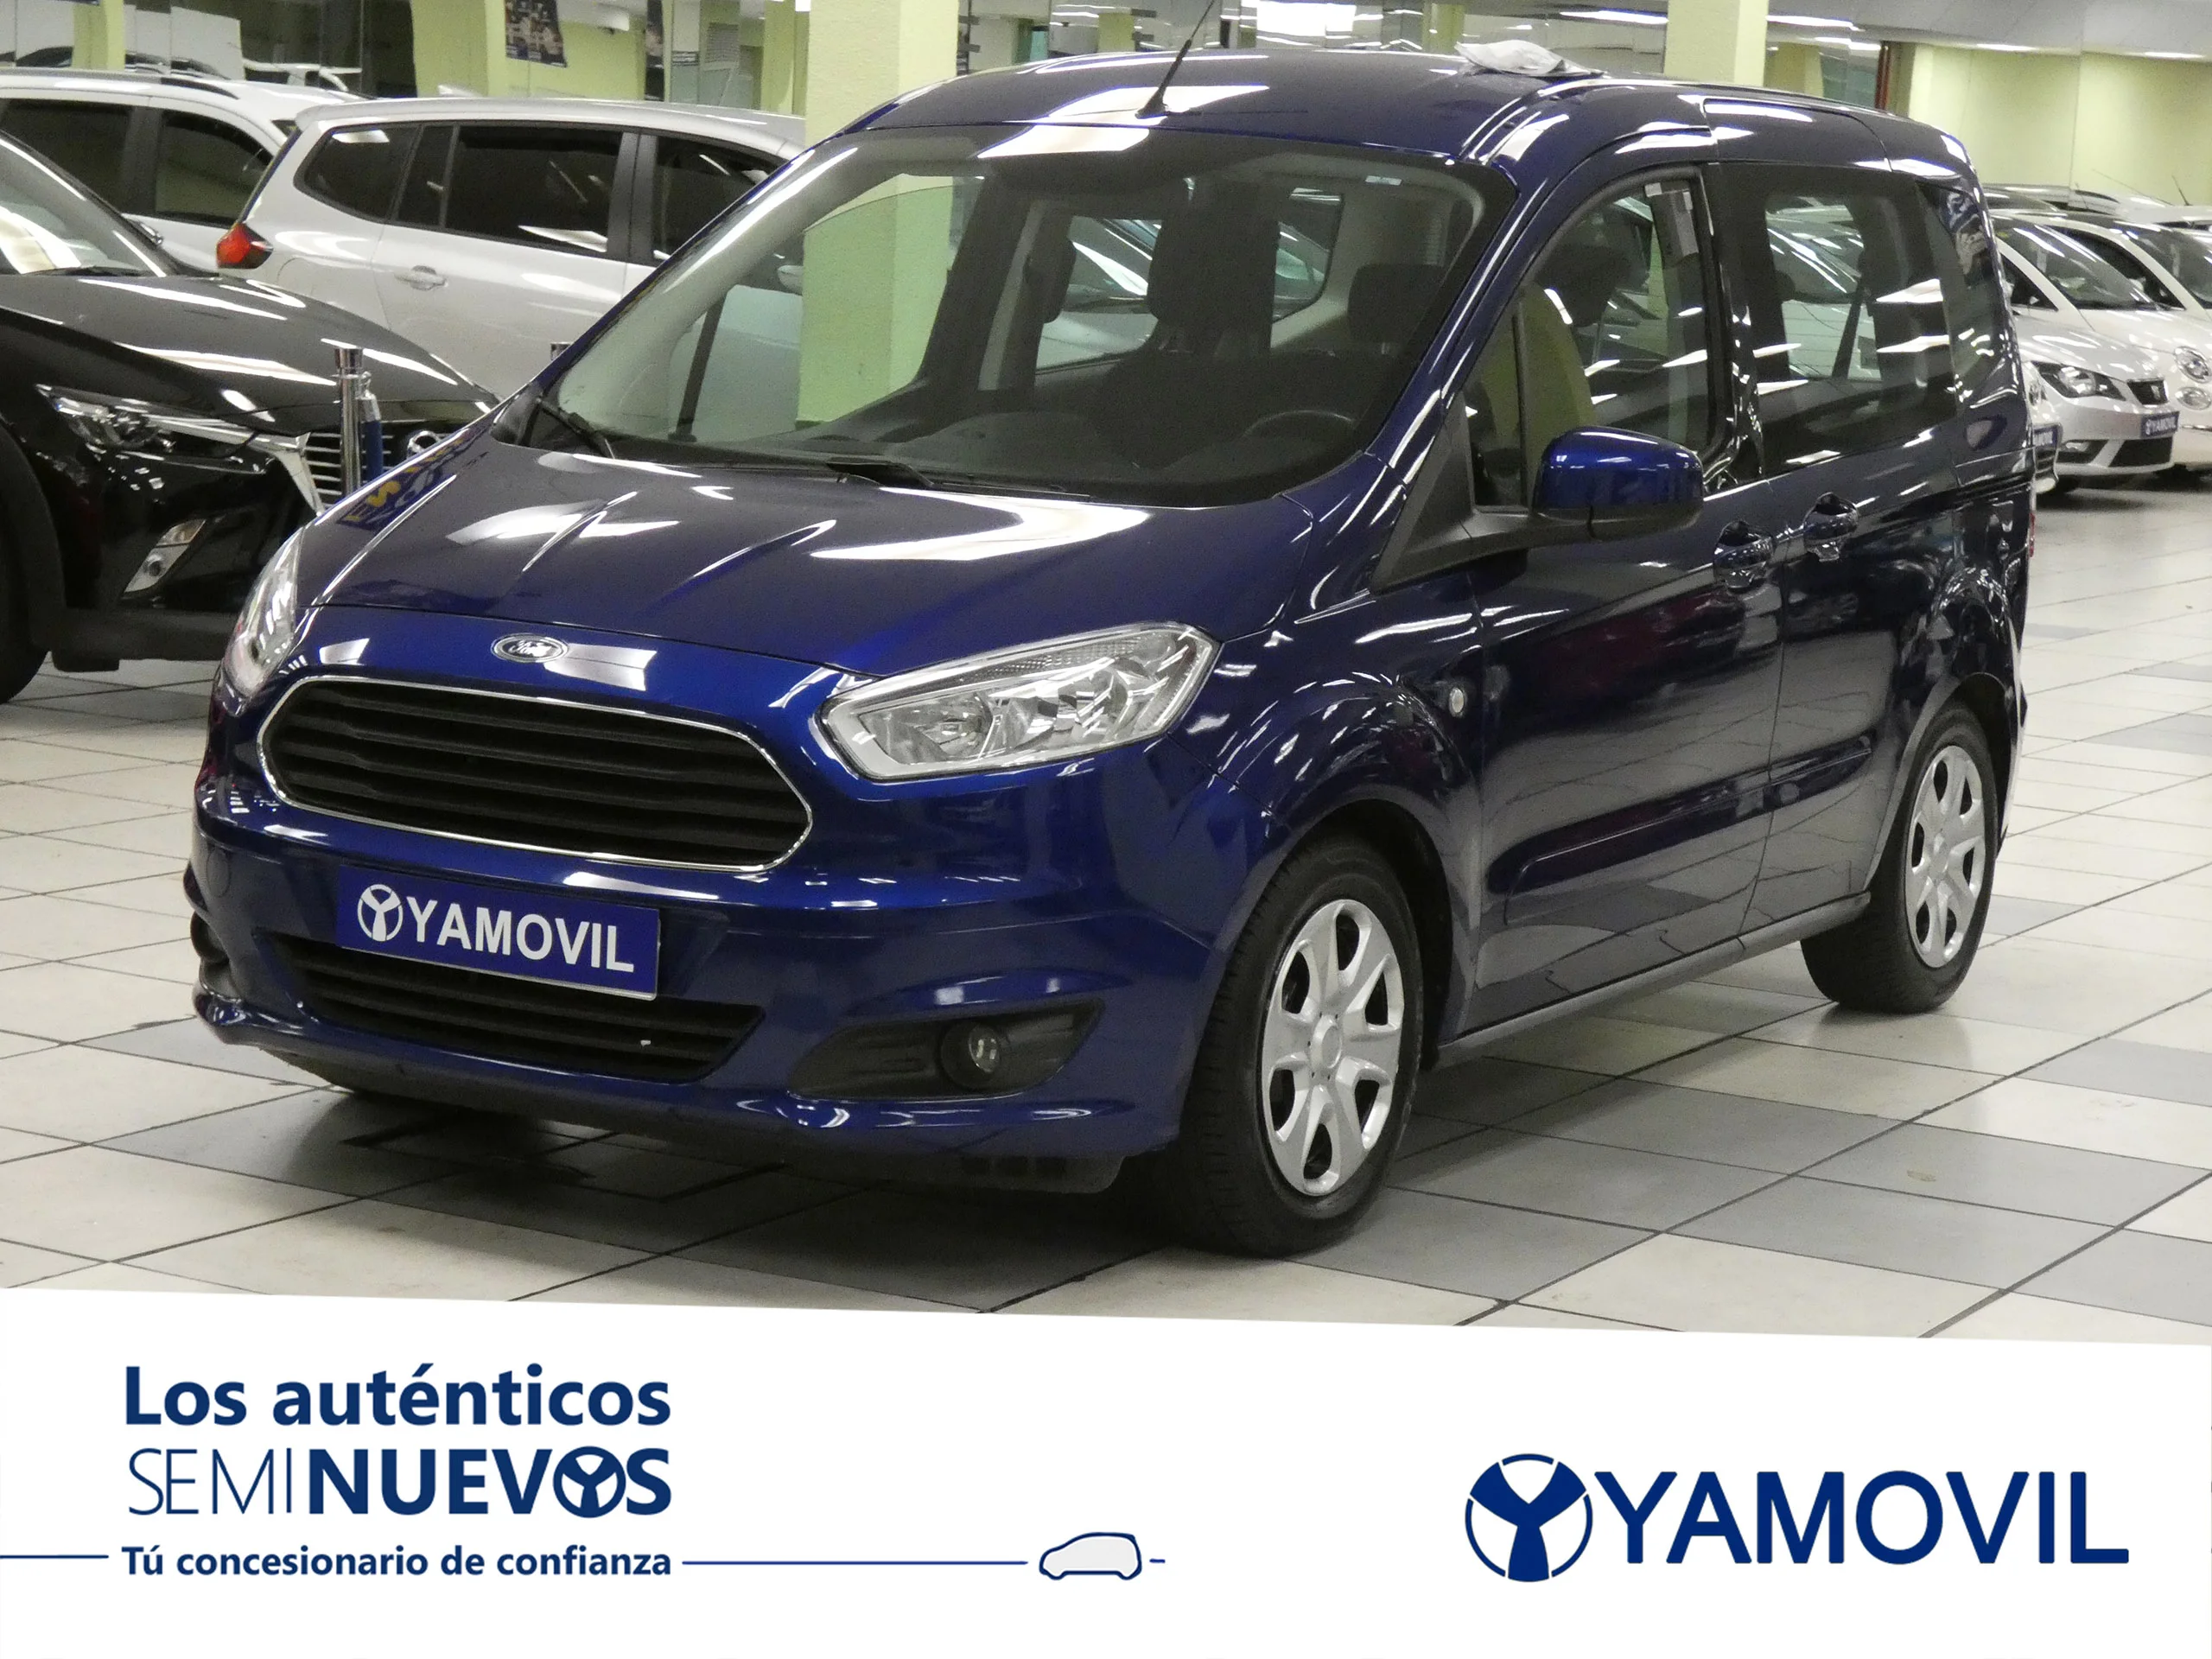 Ford Tourneo COURIER 1.6 TDCI TREND 5P - Foto 1